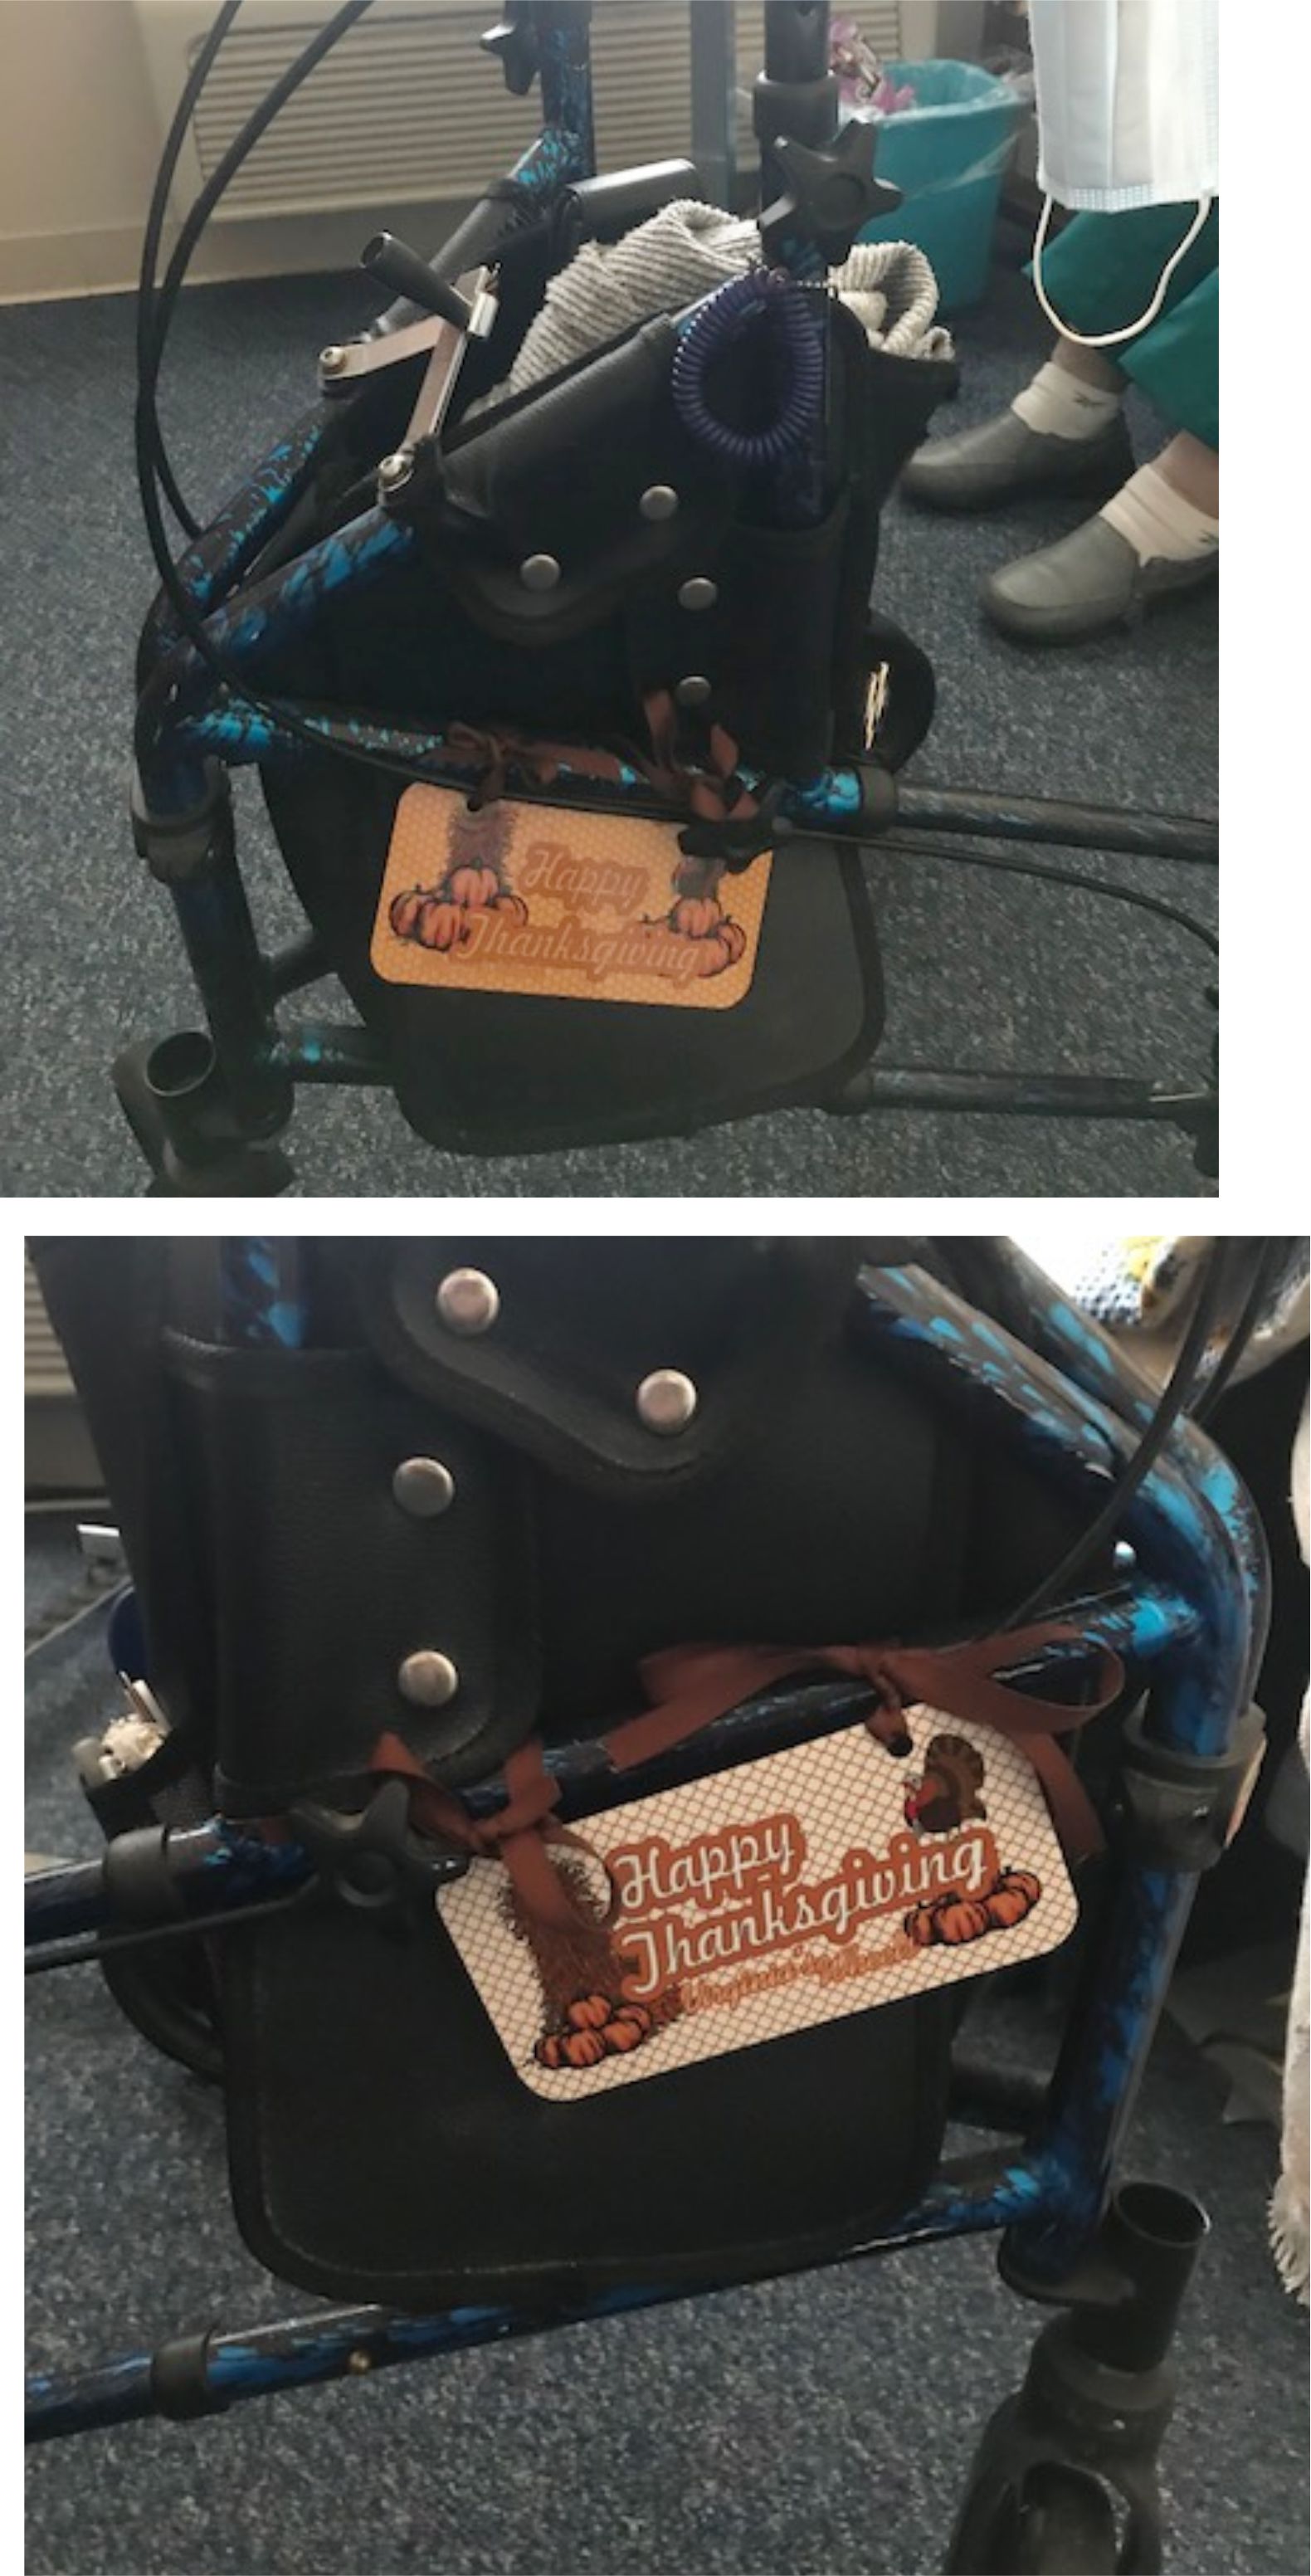 I used the mini license plate to decorate my Mother's Walker